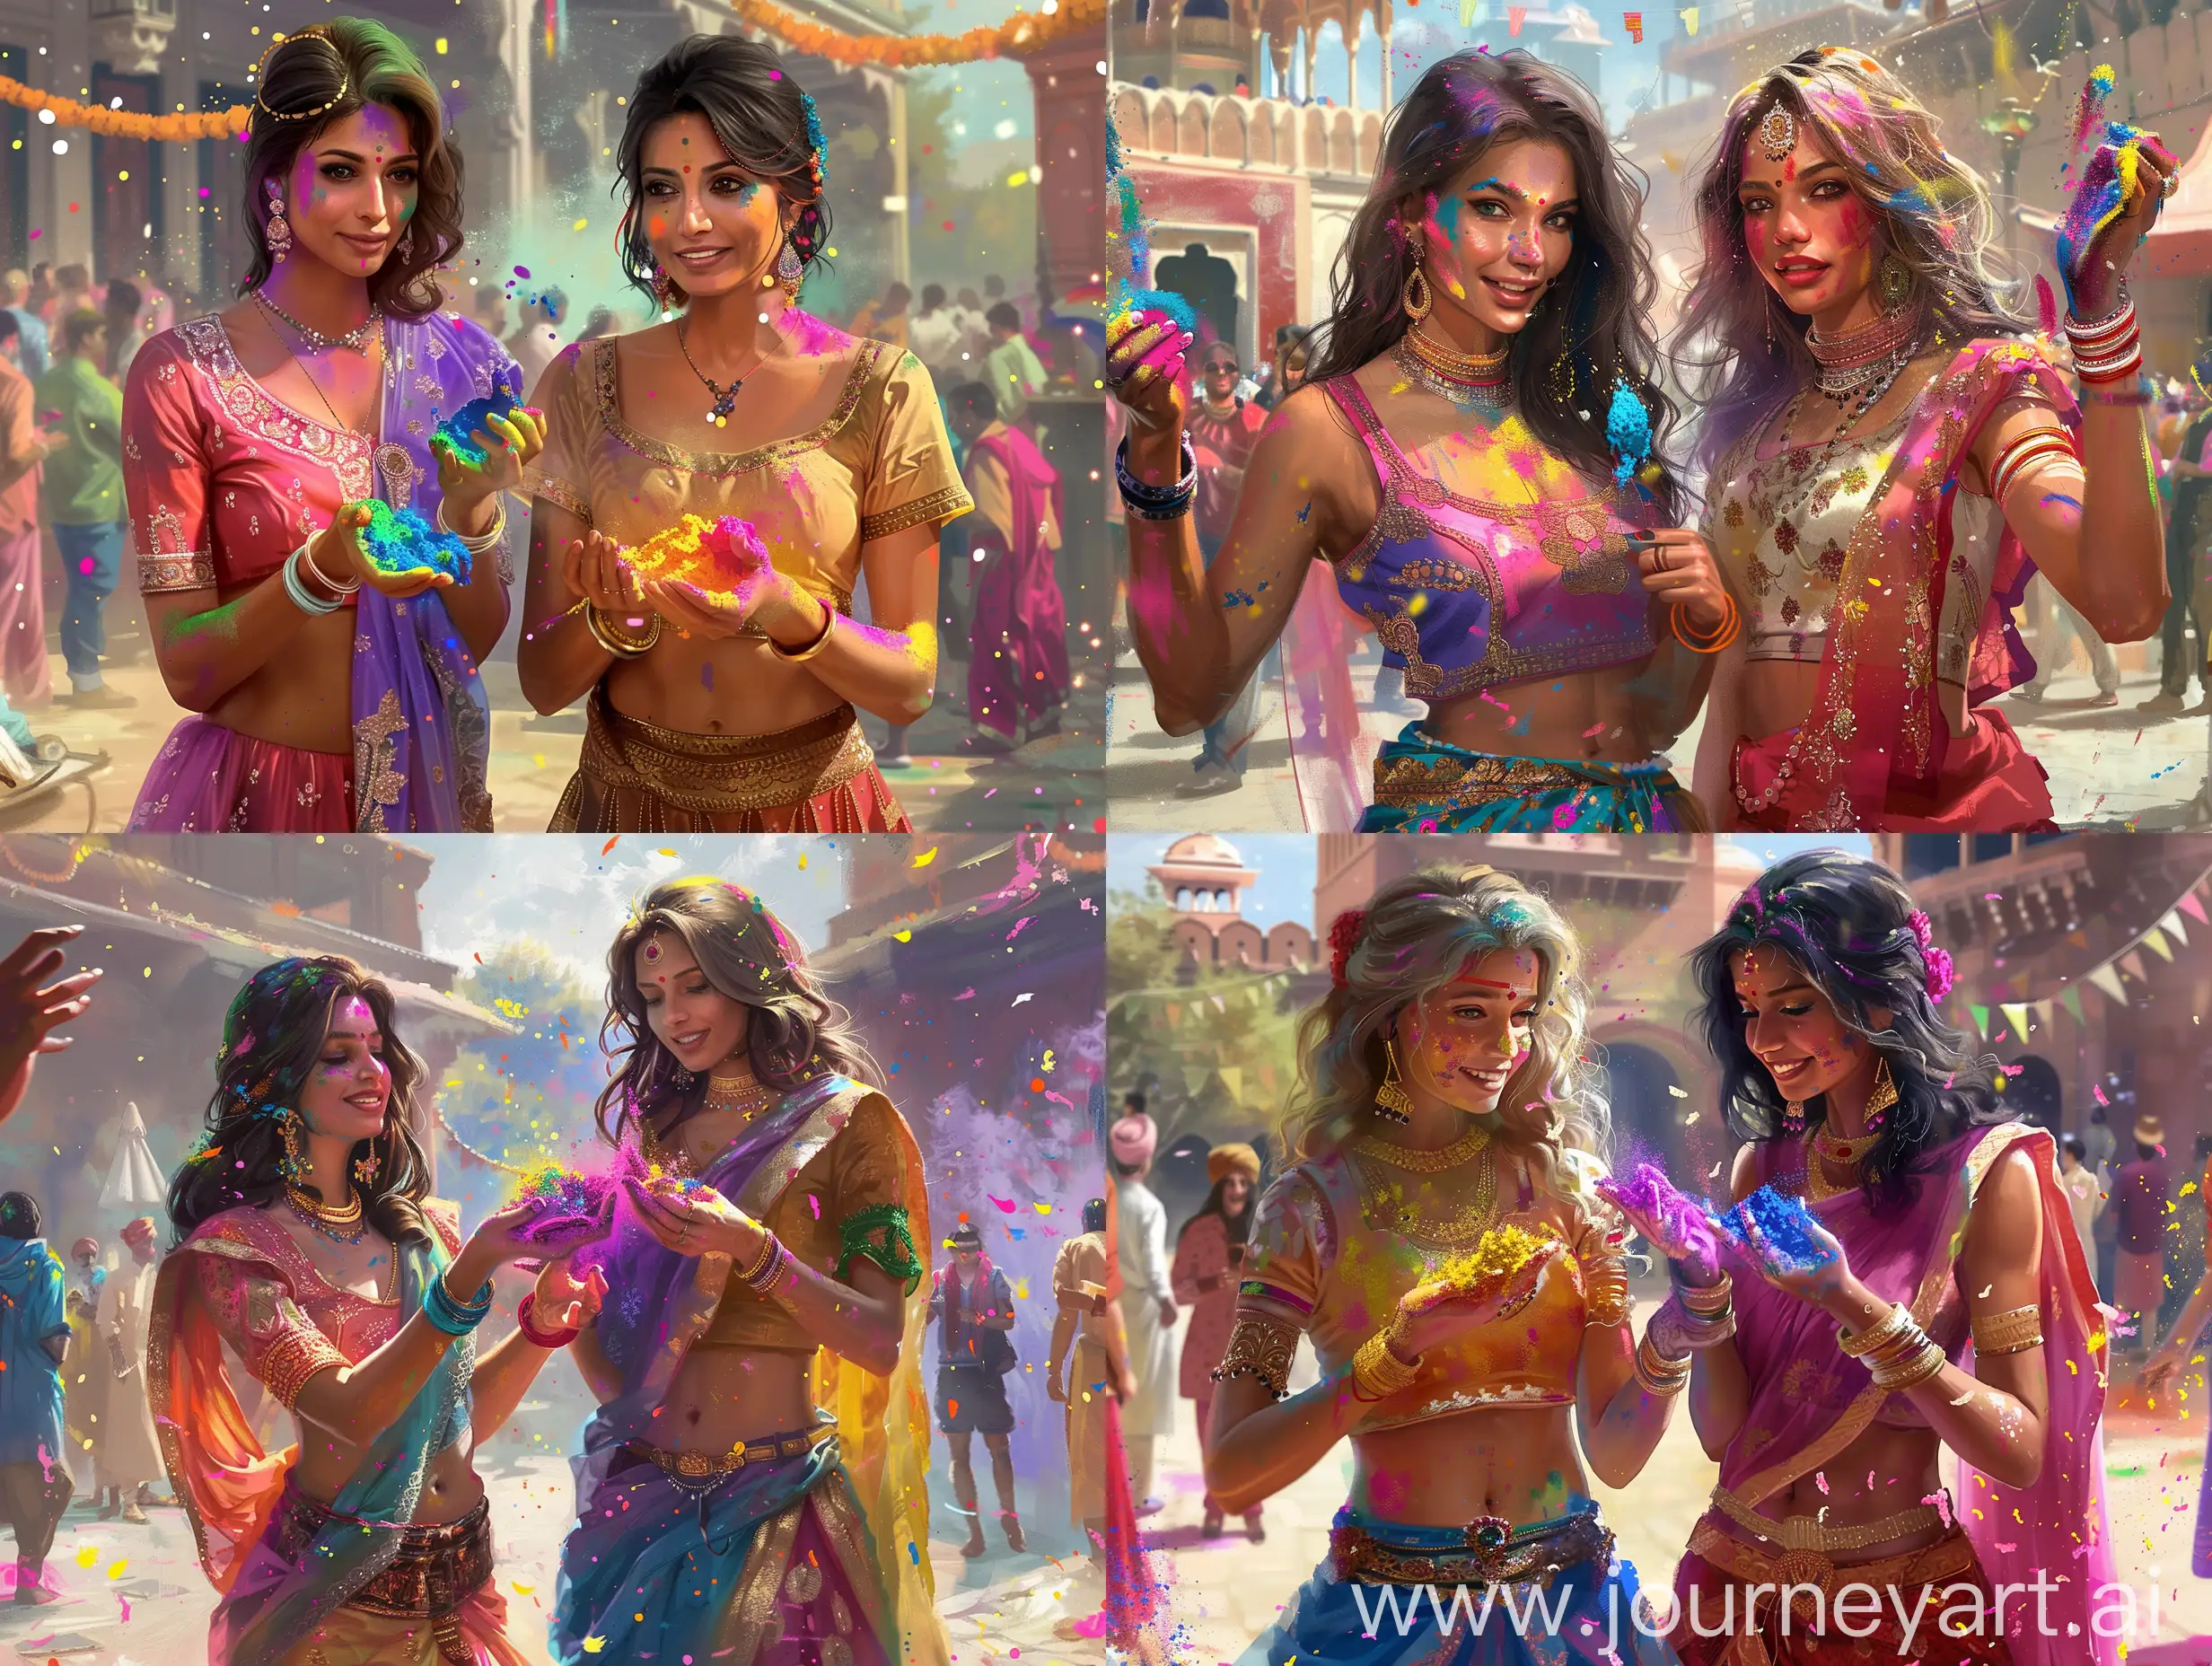 "Create an image showcasing a Western woman and an Indian woman dressed in vibrant Holi outfits, each holding a handful of colorful powdered dyes, with a background of a festive, lively atmosphere capturing the spirit of the Holi festival."